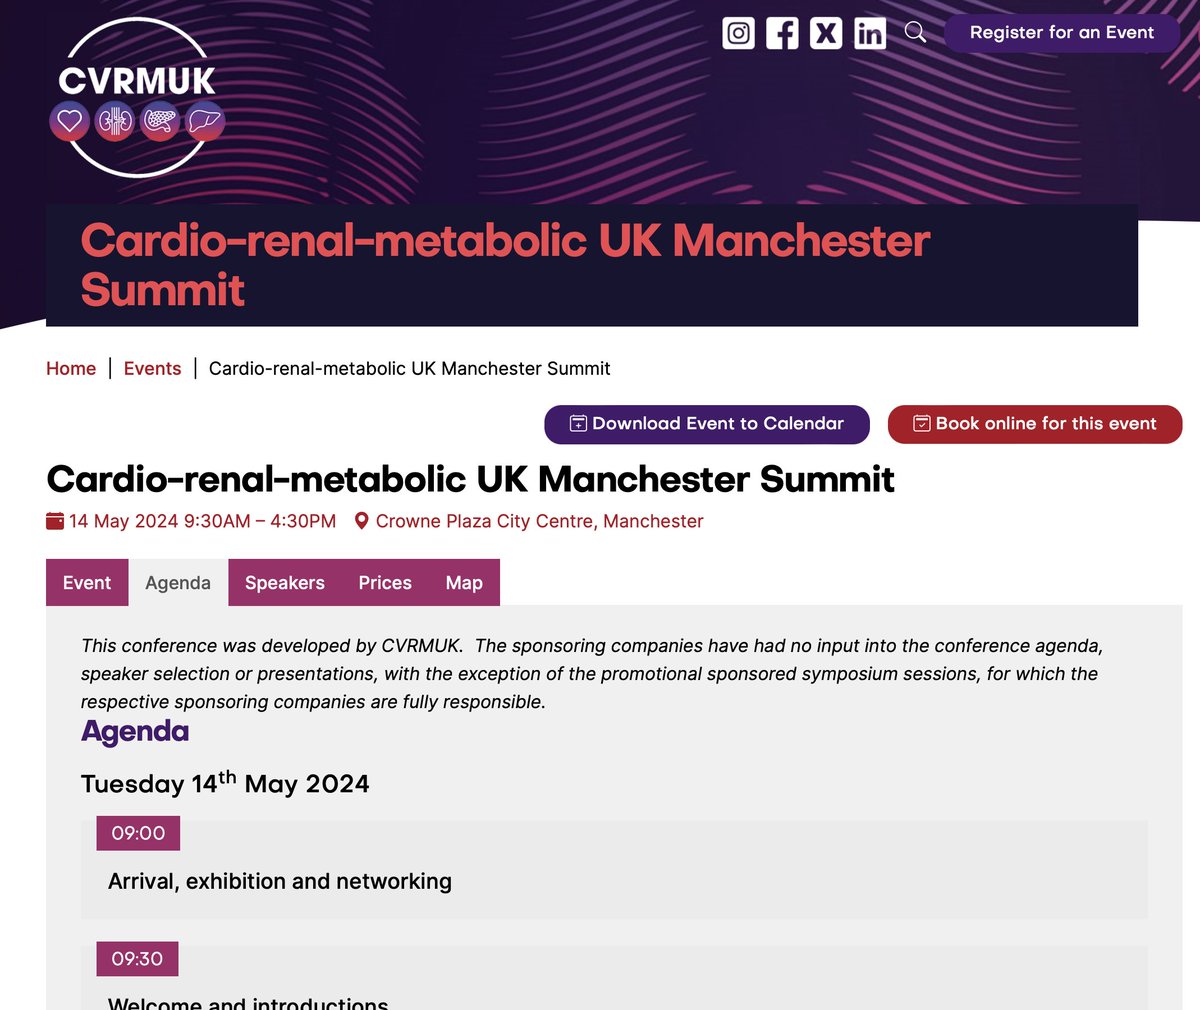 En route to @CVRMUK Manchester summit!

We've another fantastic & wide-ranging agenda covering health inequalities in #CVRM, approaches to #lifestylemedicine & sex & gender in #CVRM care

I'm speaking on #MASLD & also the intersection of sleep & #CVRM

cvrmuk.com/events/35/card…